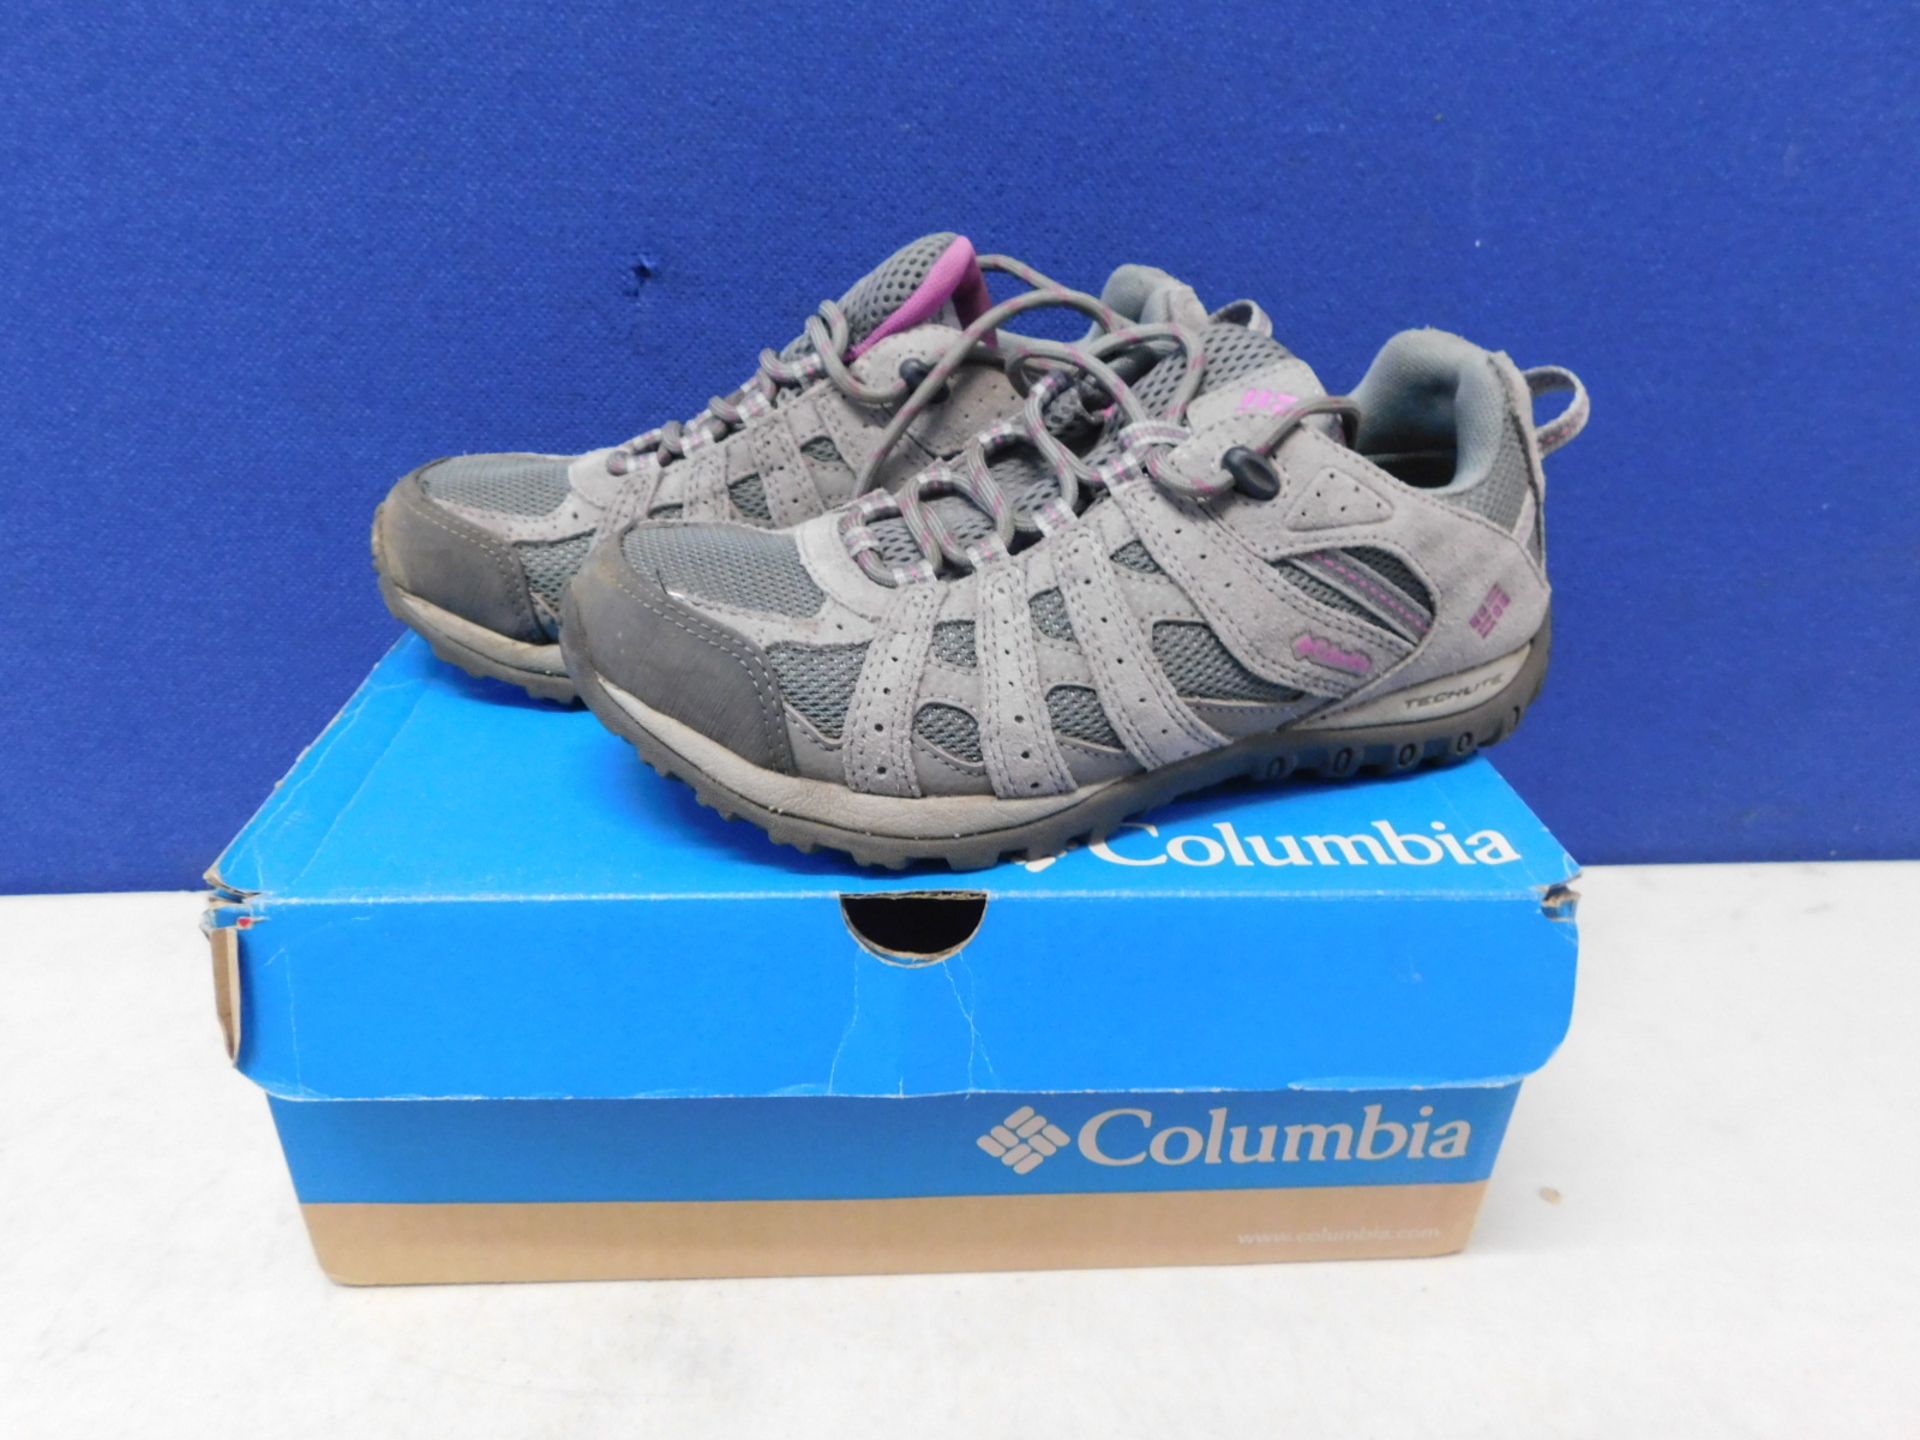 1 BOXED PAIR OF WOMENS COLUMBIA REDCREST WATERPROOF SHOES UK SIZE 5 RRP Â£79